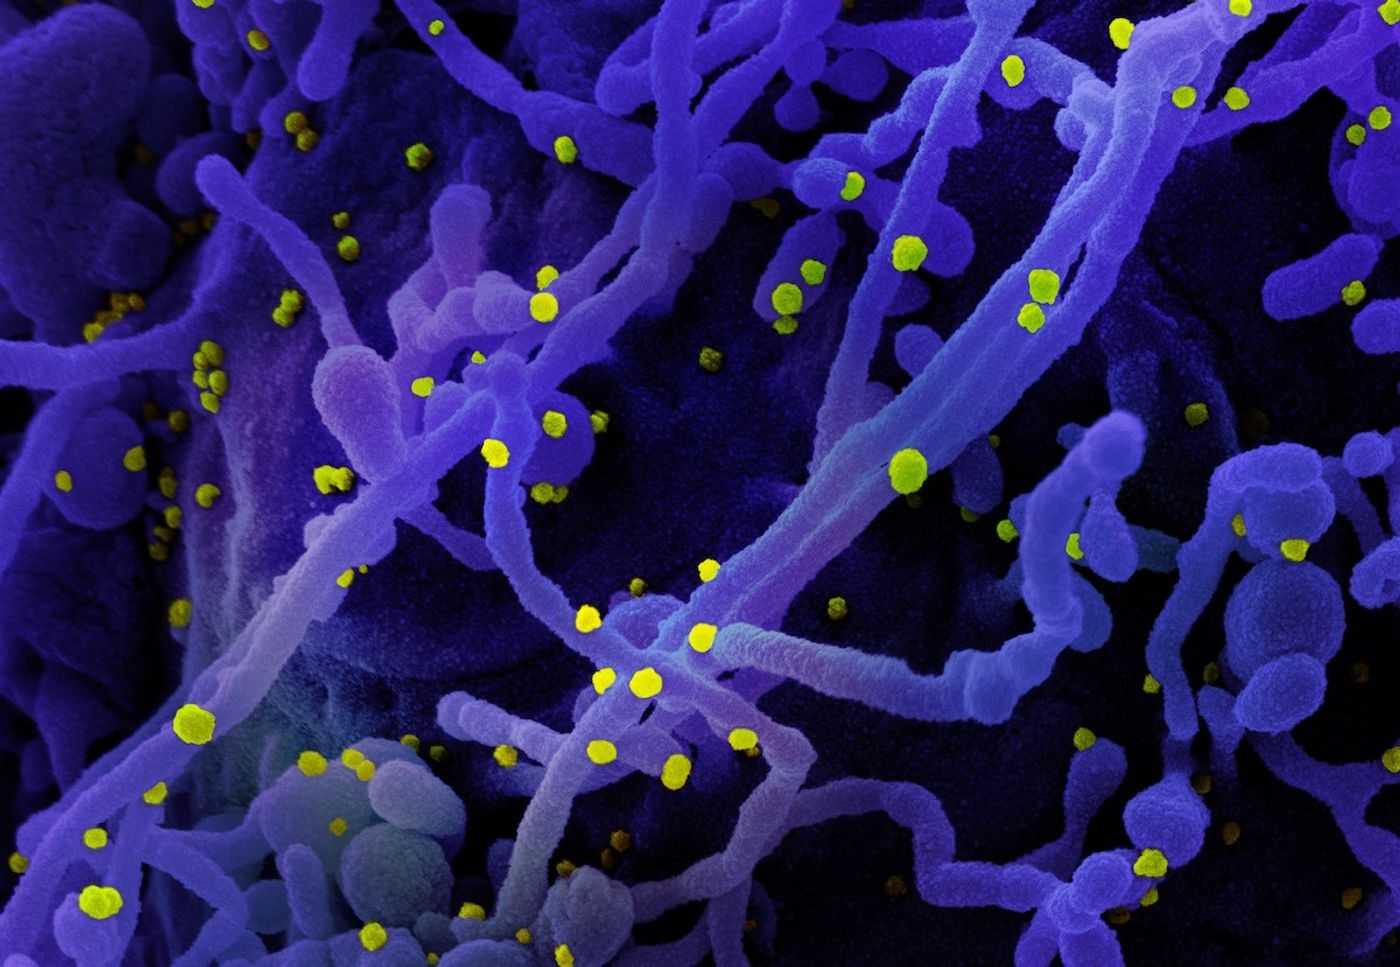 Cropped from a colorized scanning electron micrograph of a cell (purple) infected with SARS-CoV-2 virus particles (yellow), isolated from a patient sample. Image captured at the NIAID Integrated Research Facility (IRF) in Fort Detrick, Maryland. Credit: NIAID